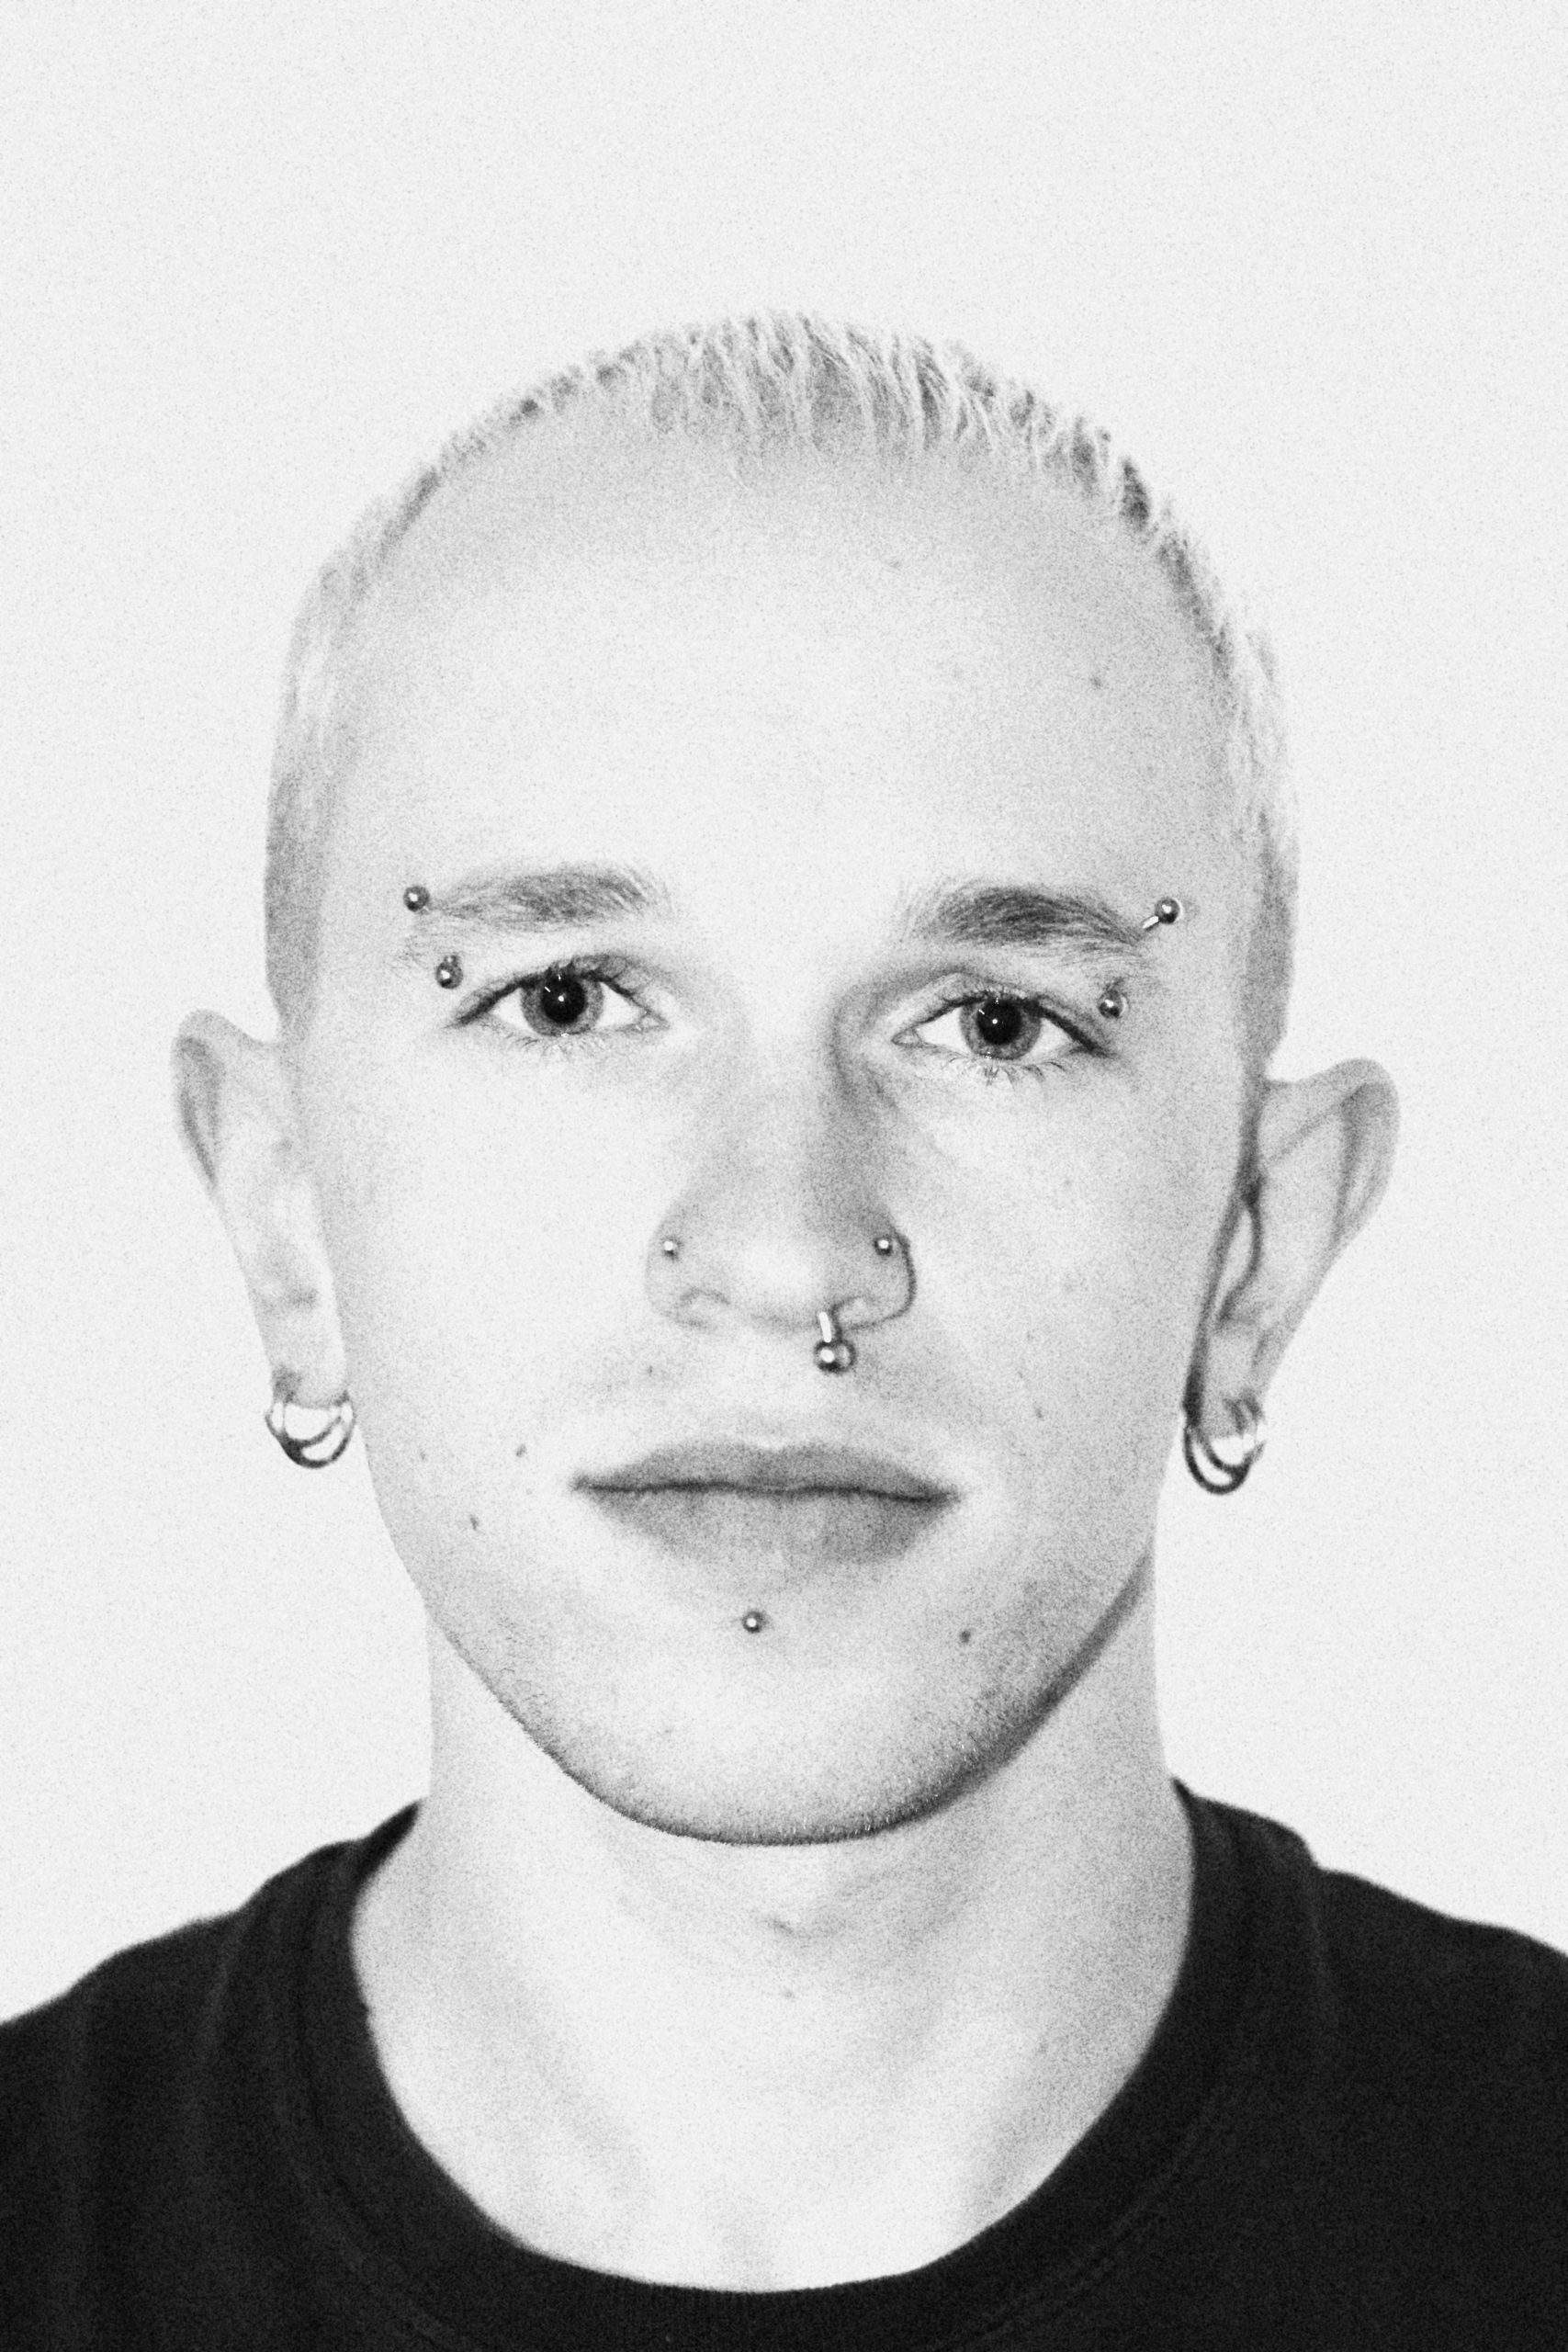 A black and white portrait photo of a man with very short bleached hair. He's wearing a black t-shirt and has several piercings on his face.